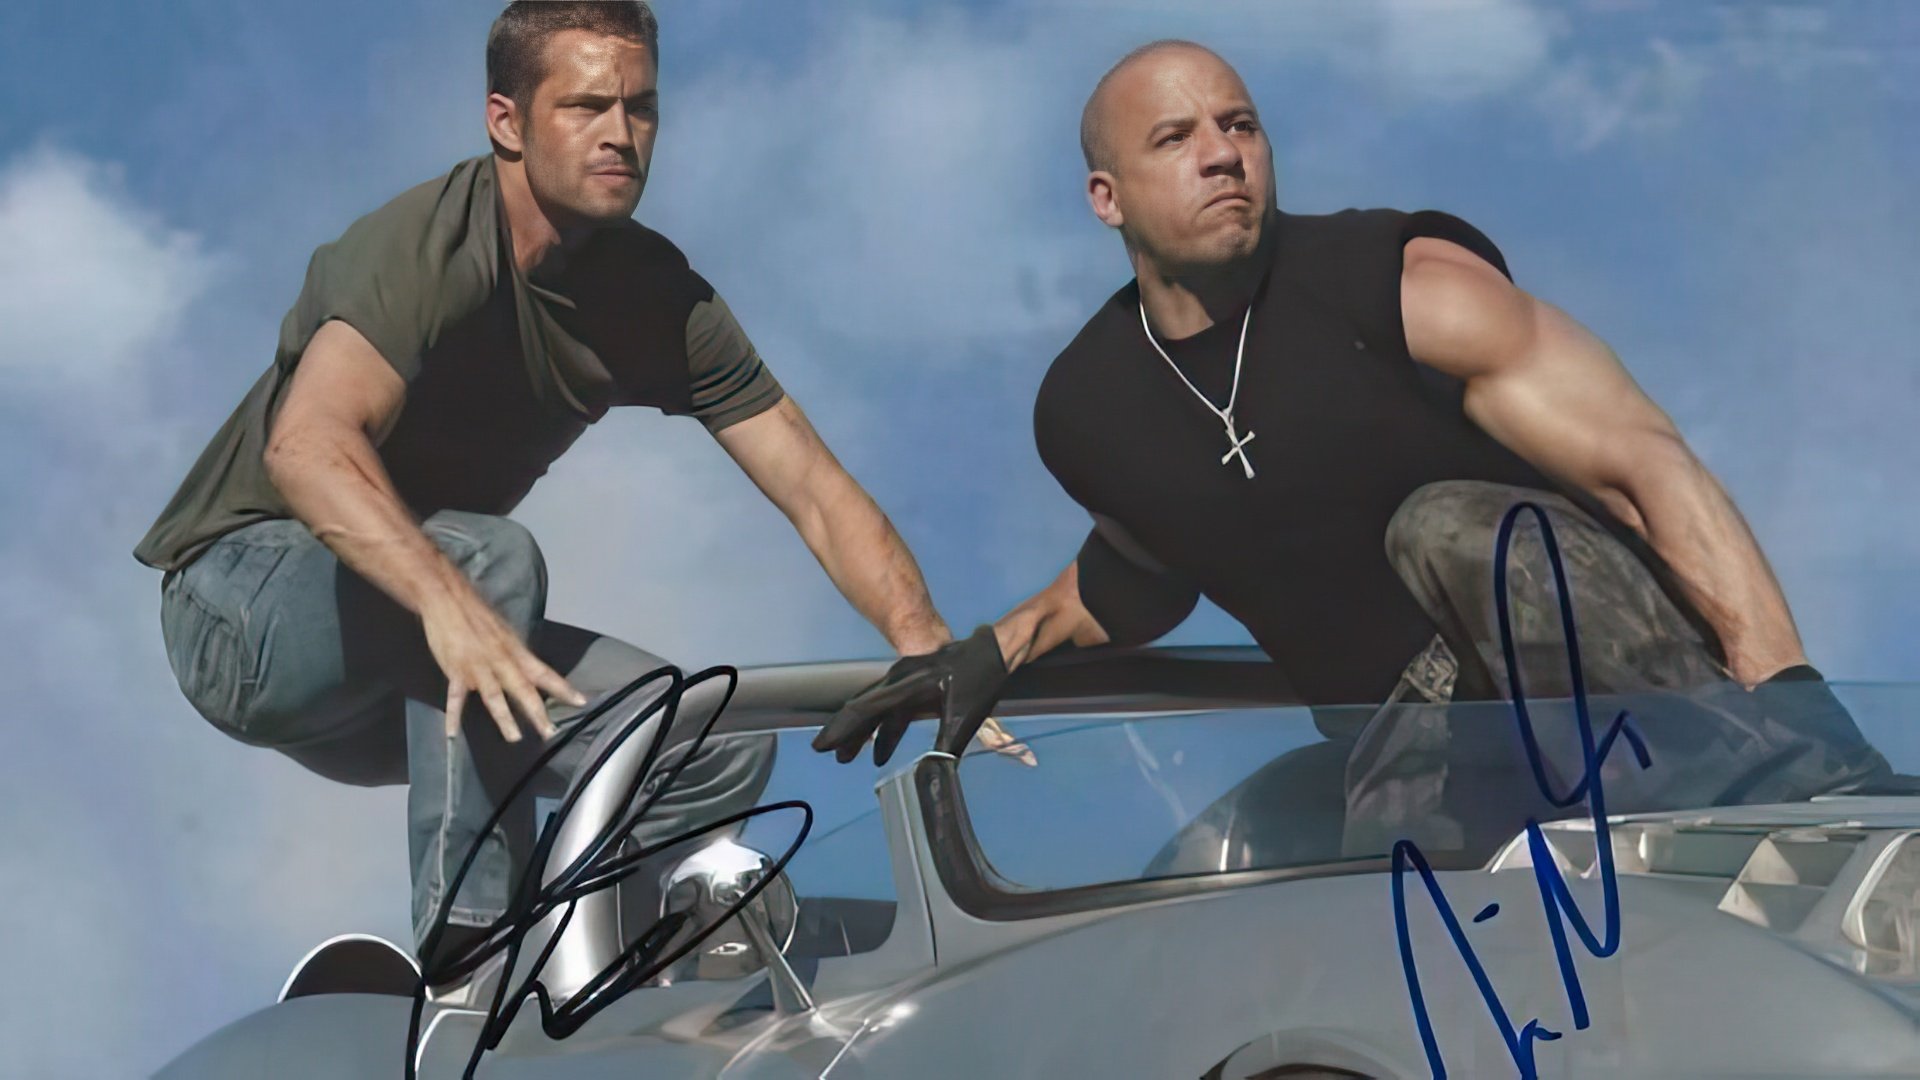 Photos from 'The Fast and the Furious' shooting signed by Vin Diesel and Paul Walker